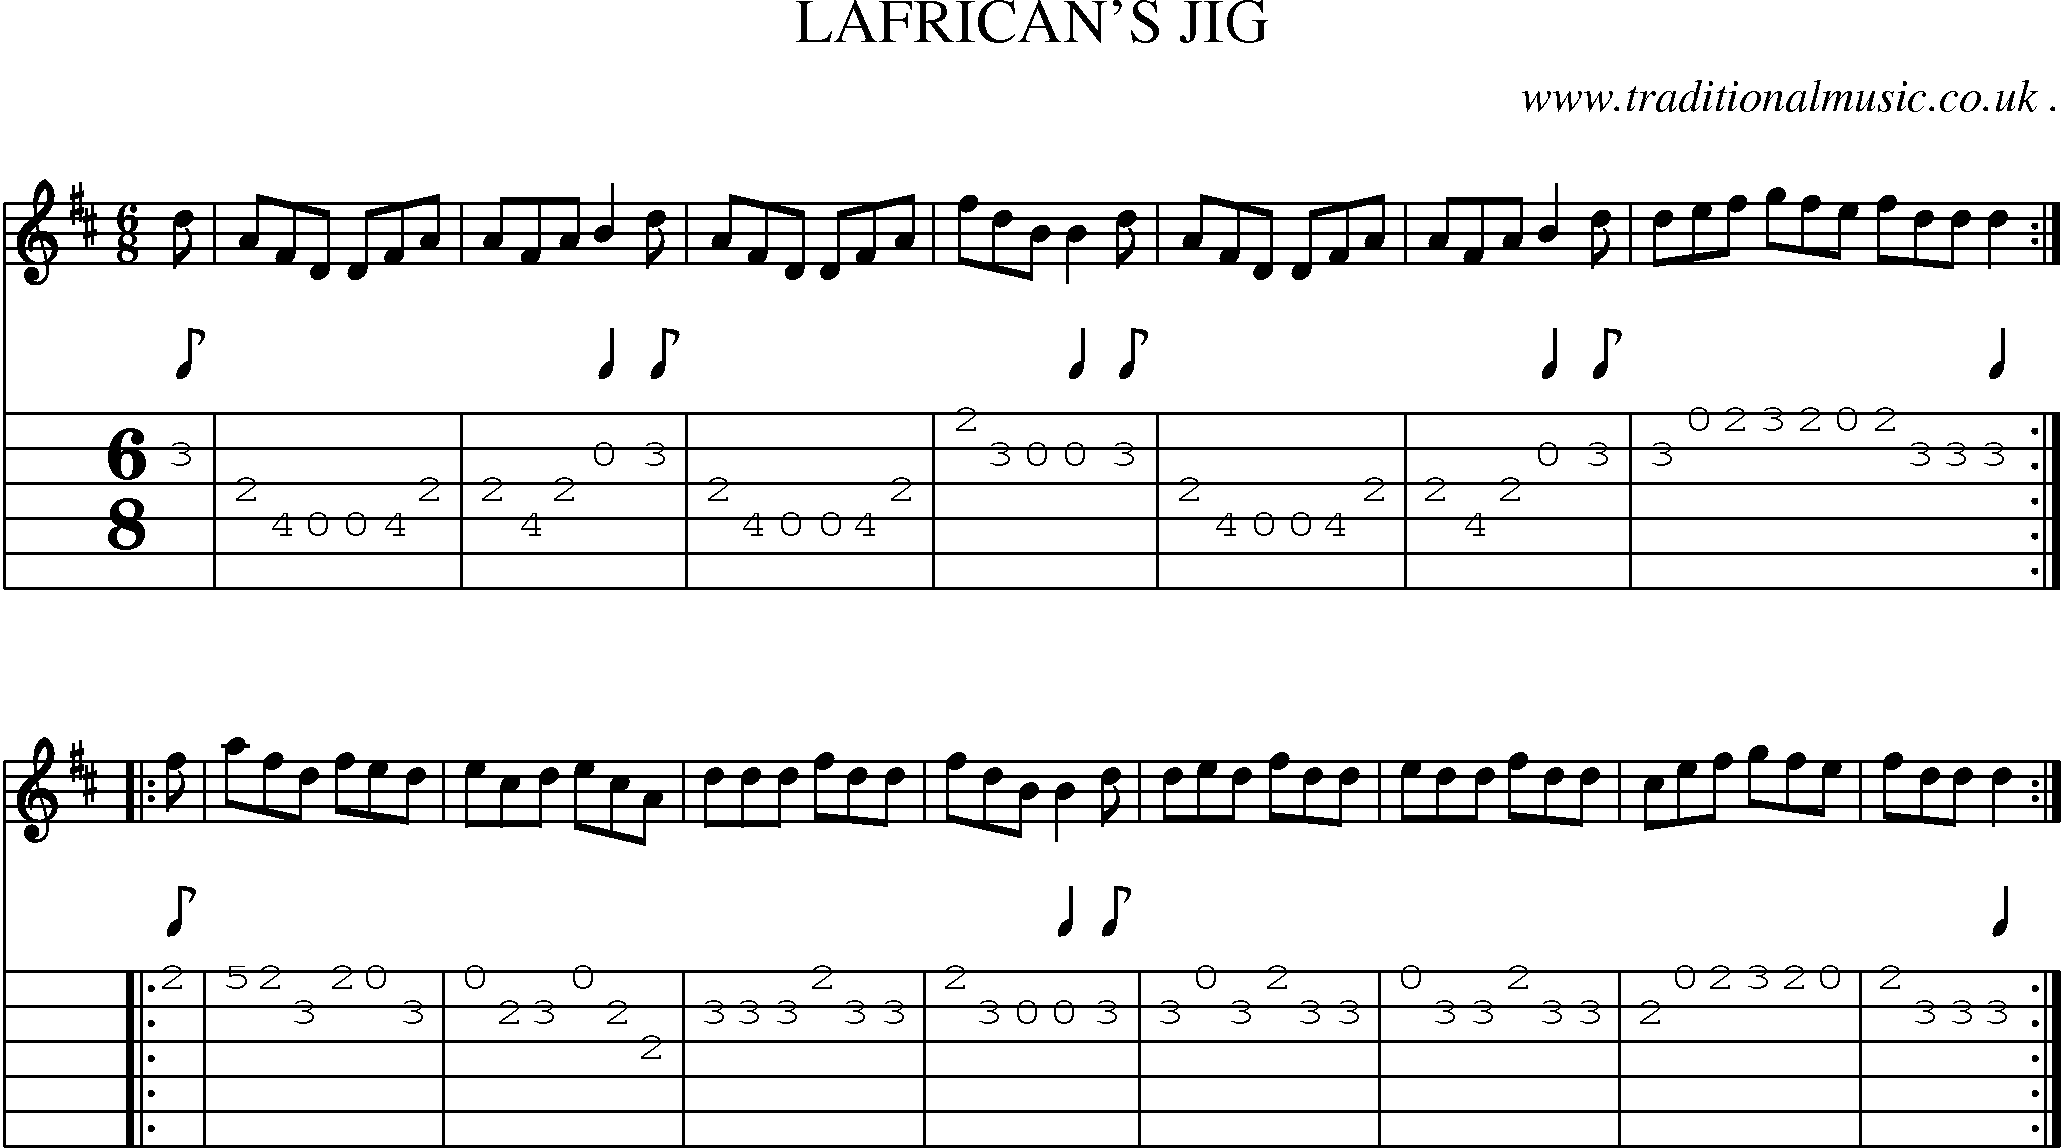 Sheet-Music and Guitar Tabs for Lafricans Jig